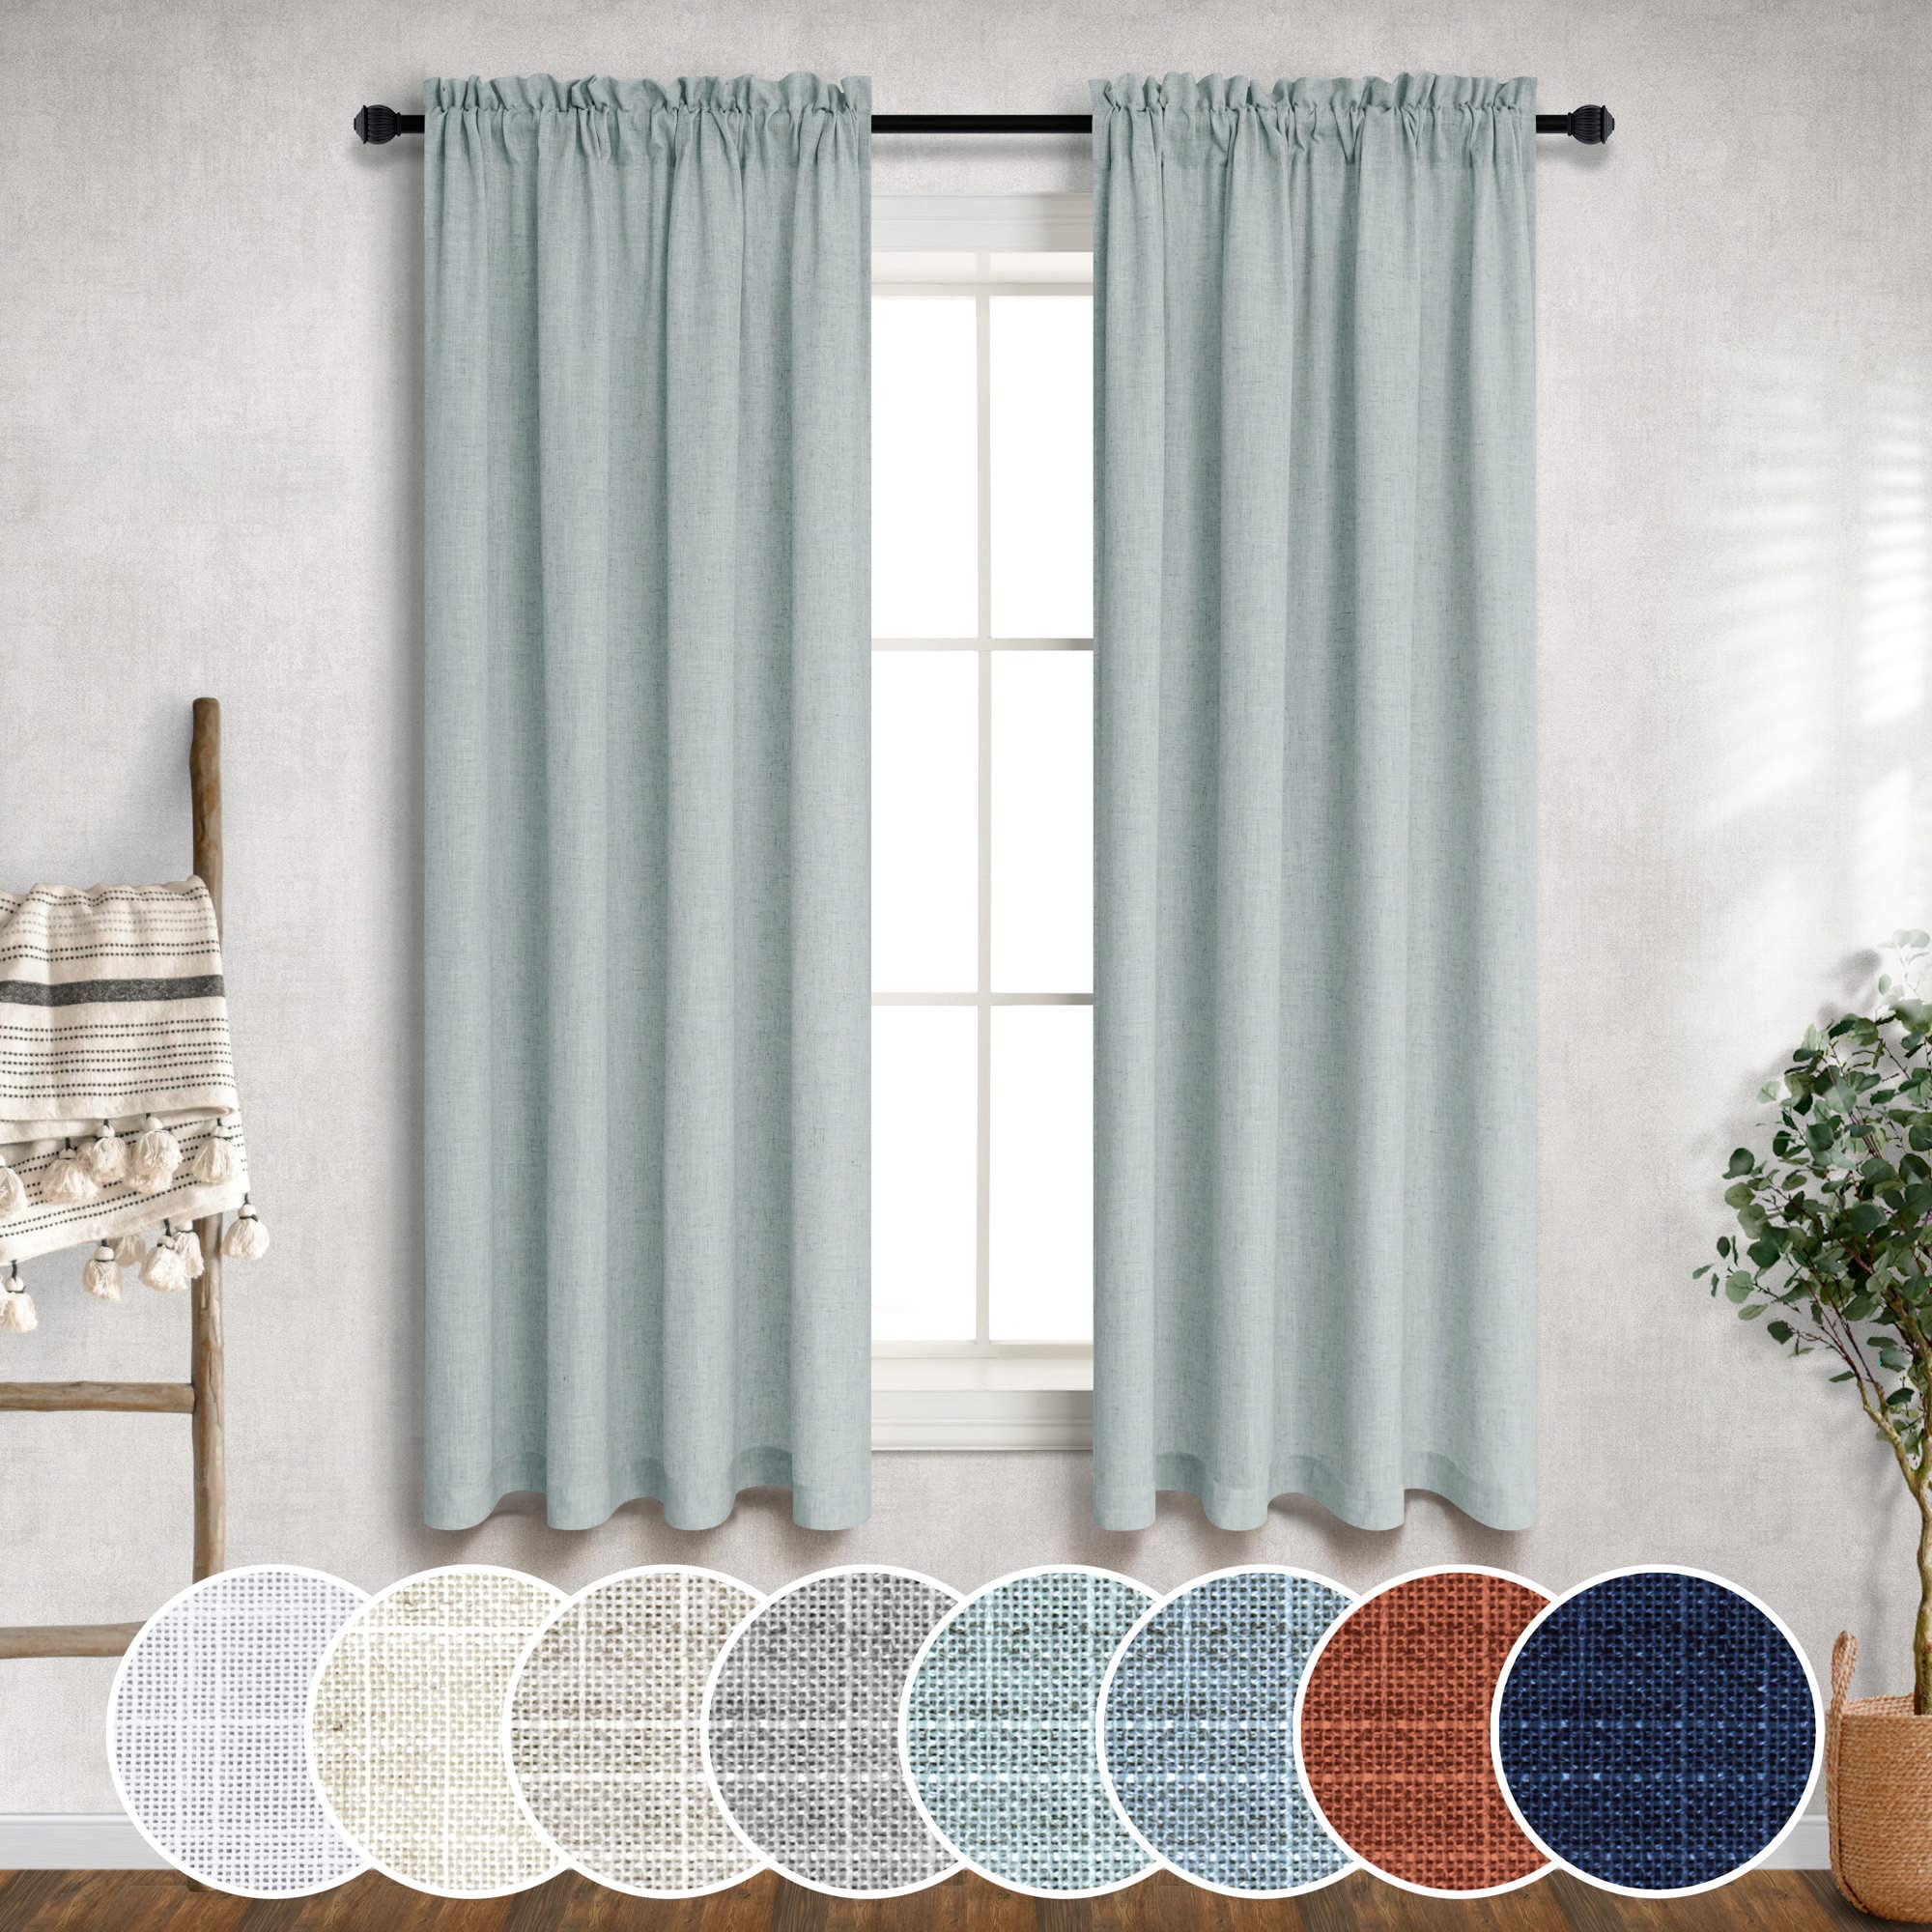 Mrs.Naturall Aqua Curtains 38 Inch Width for Kitchen 2 Panel Rod Pocket Semi Sheer Linen Short Cafe Blue Green Tier Curtains for Basement Lau